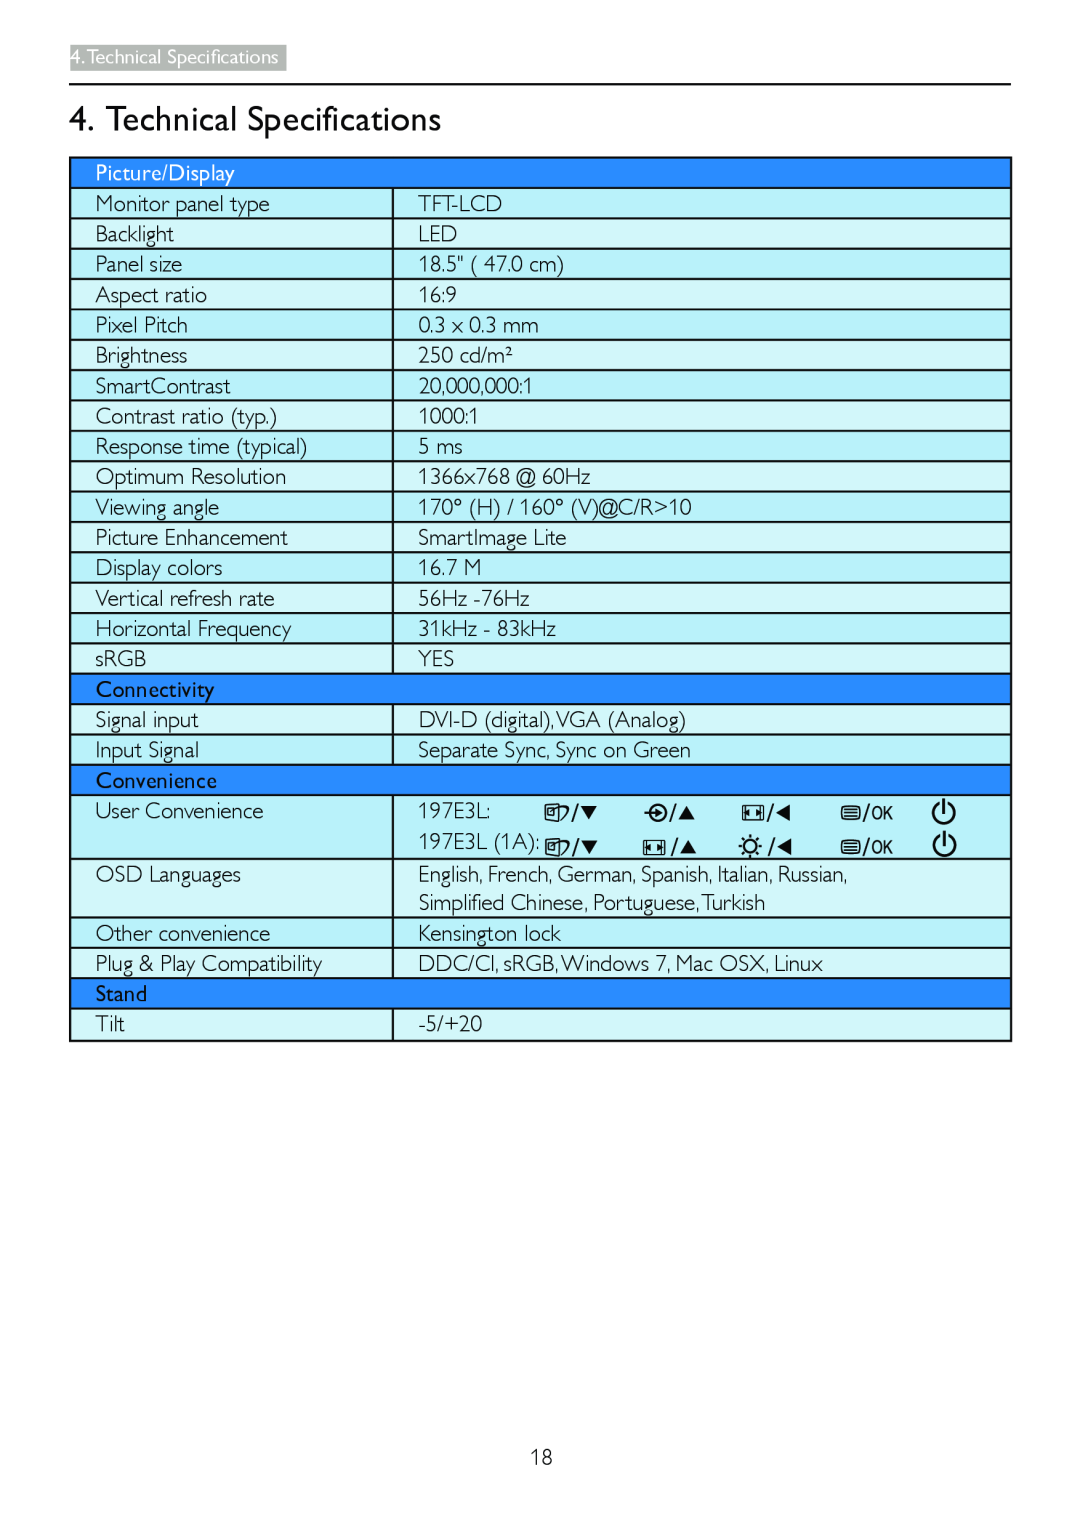 Philips 197E3L user manual Technical Specifications, Picture/Display 